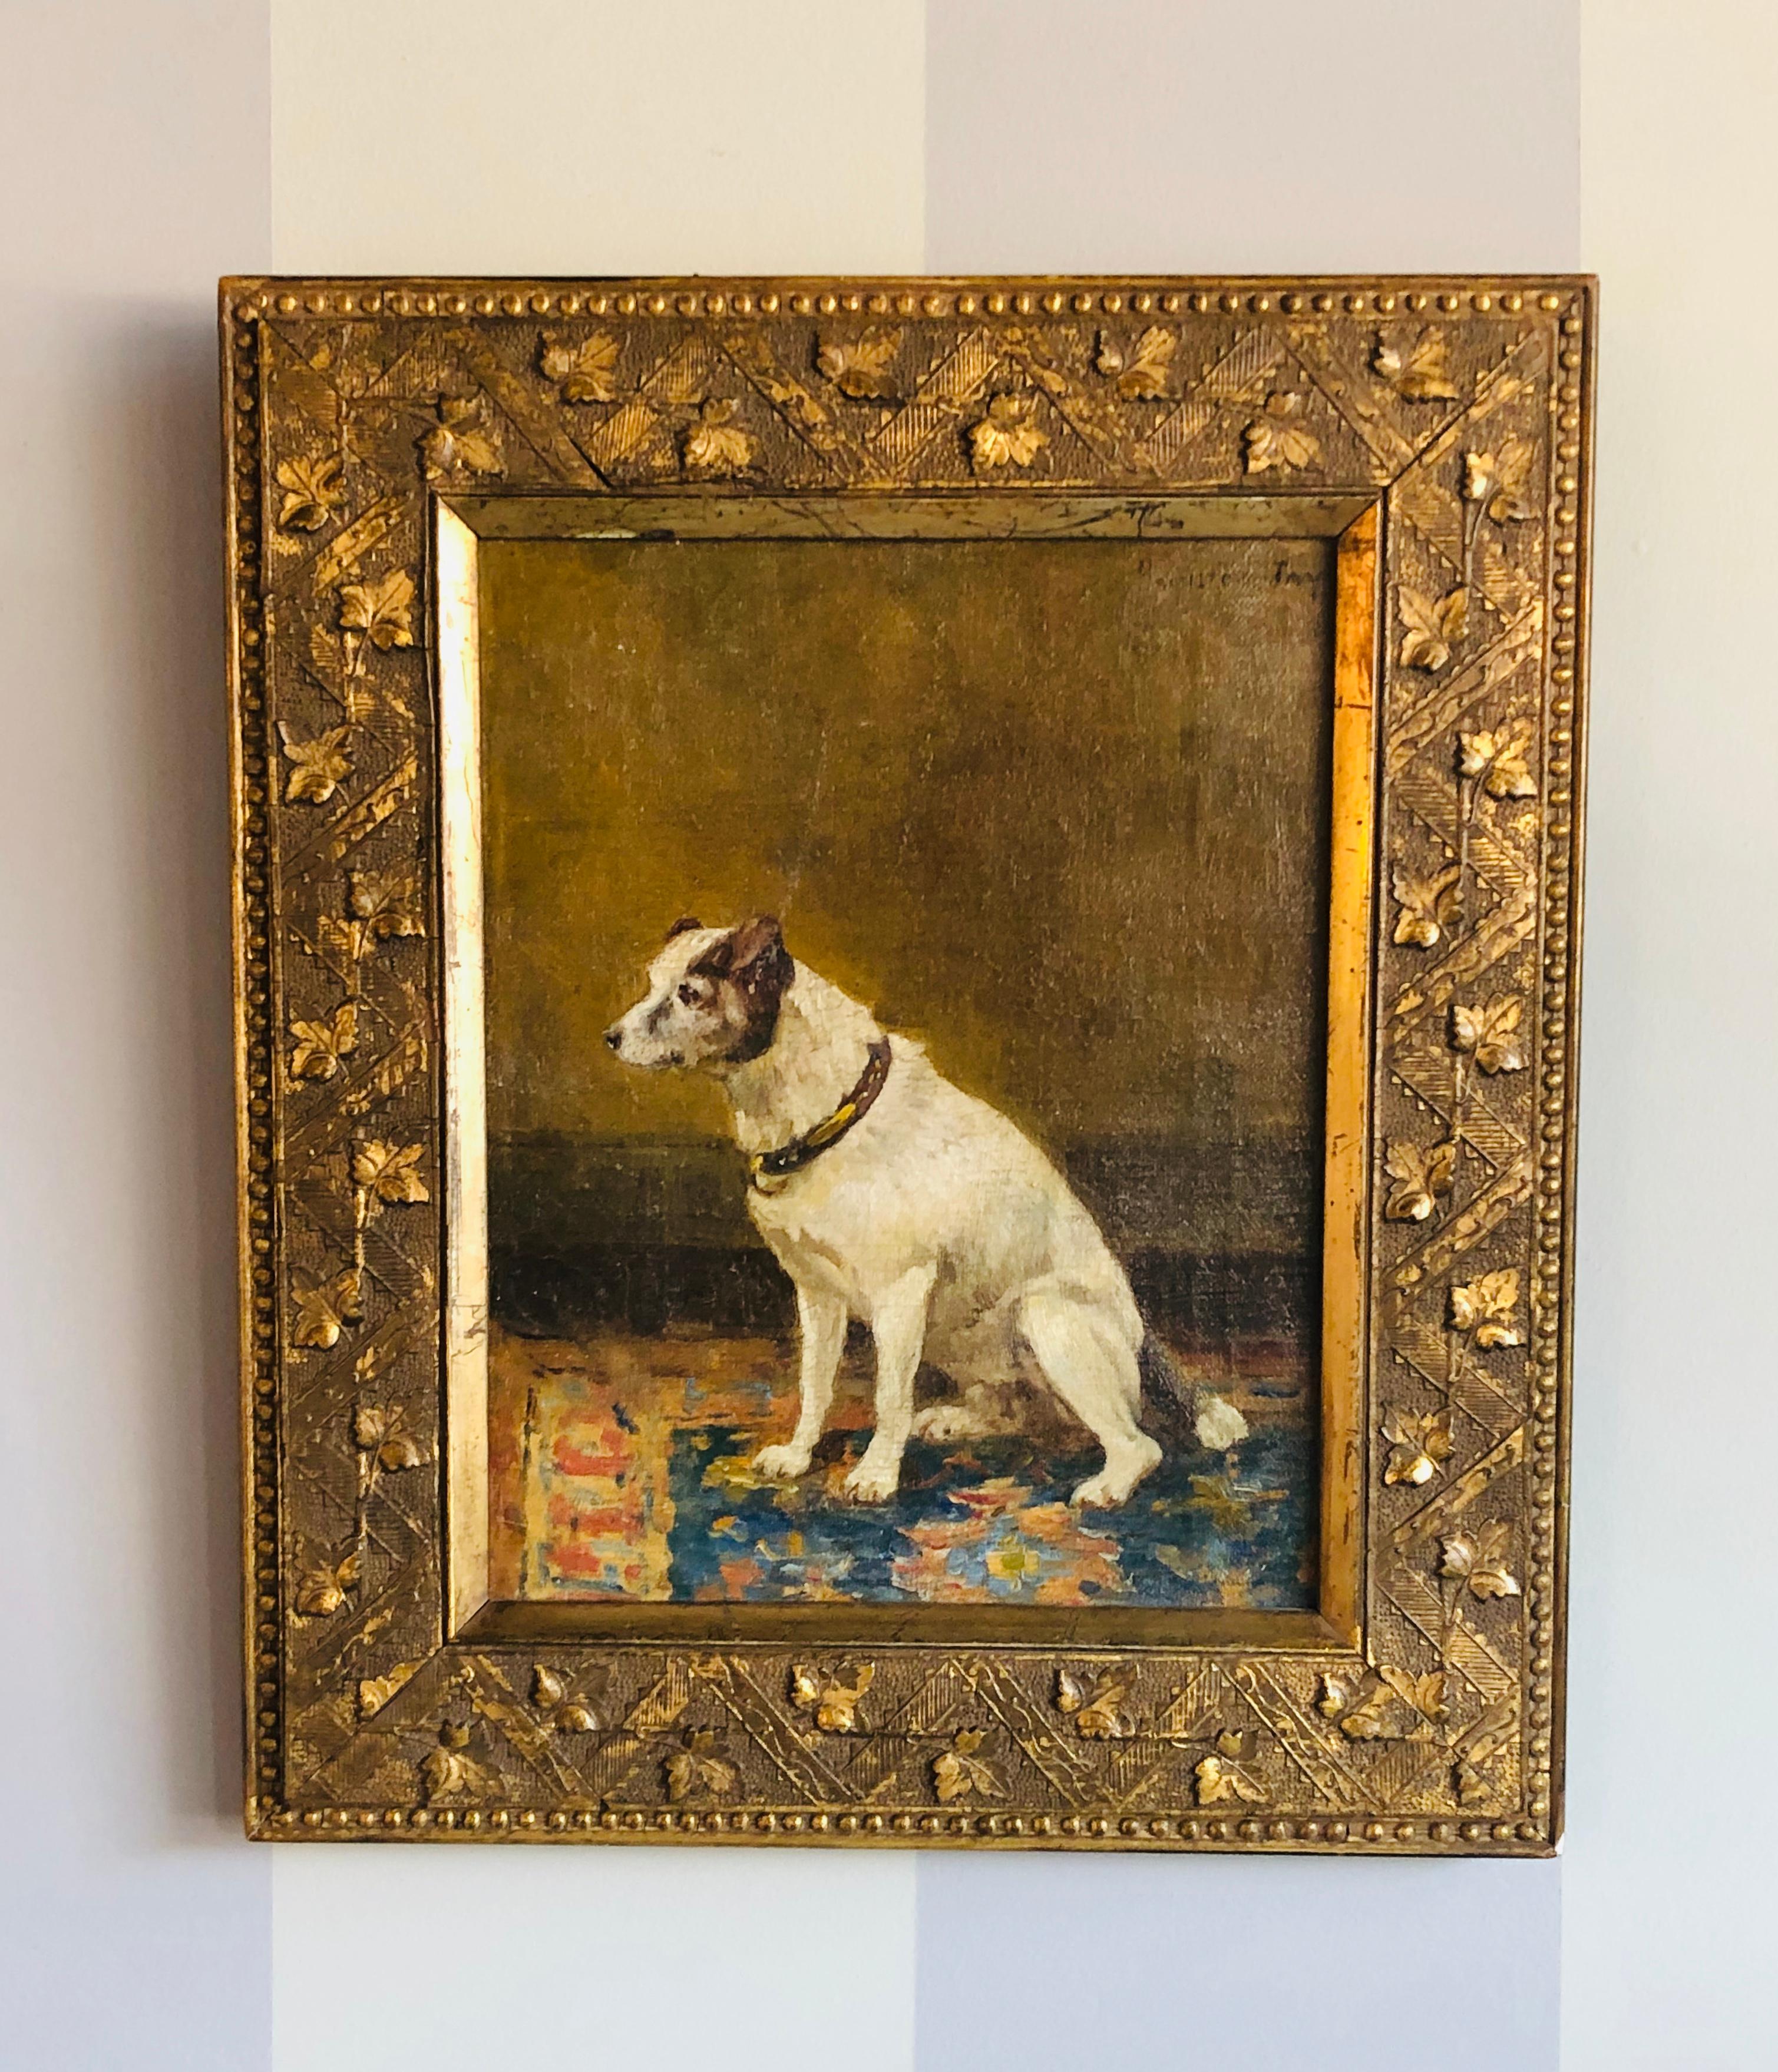 American Classical 19th Century Oil on Canvas of a Dog, Jay Hamilton with Provenance